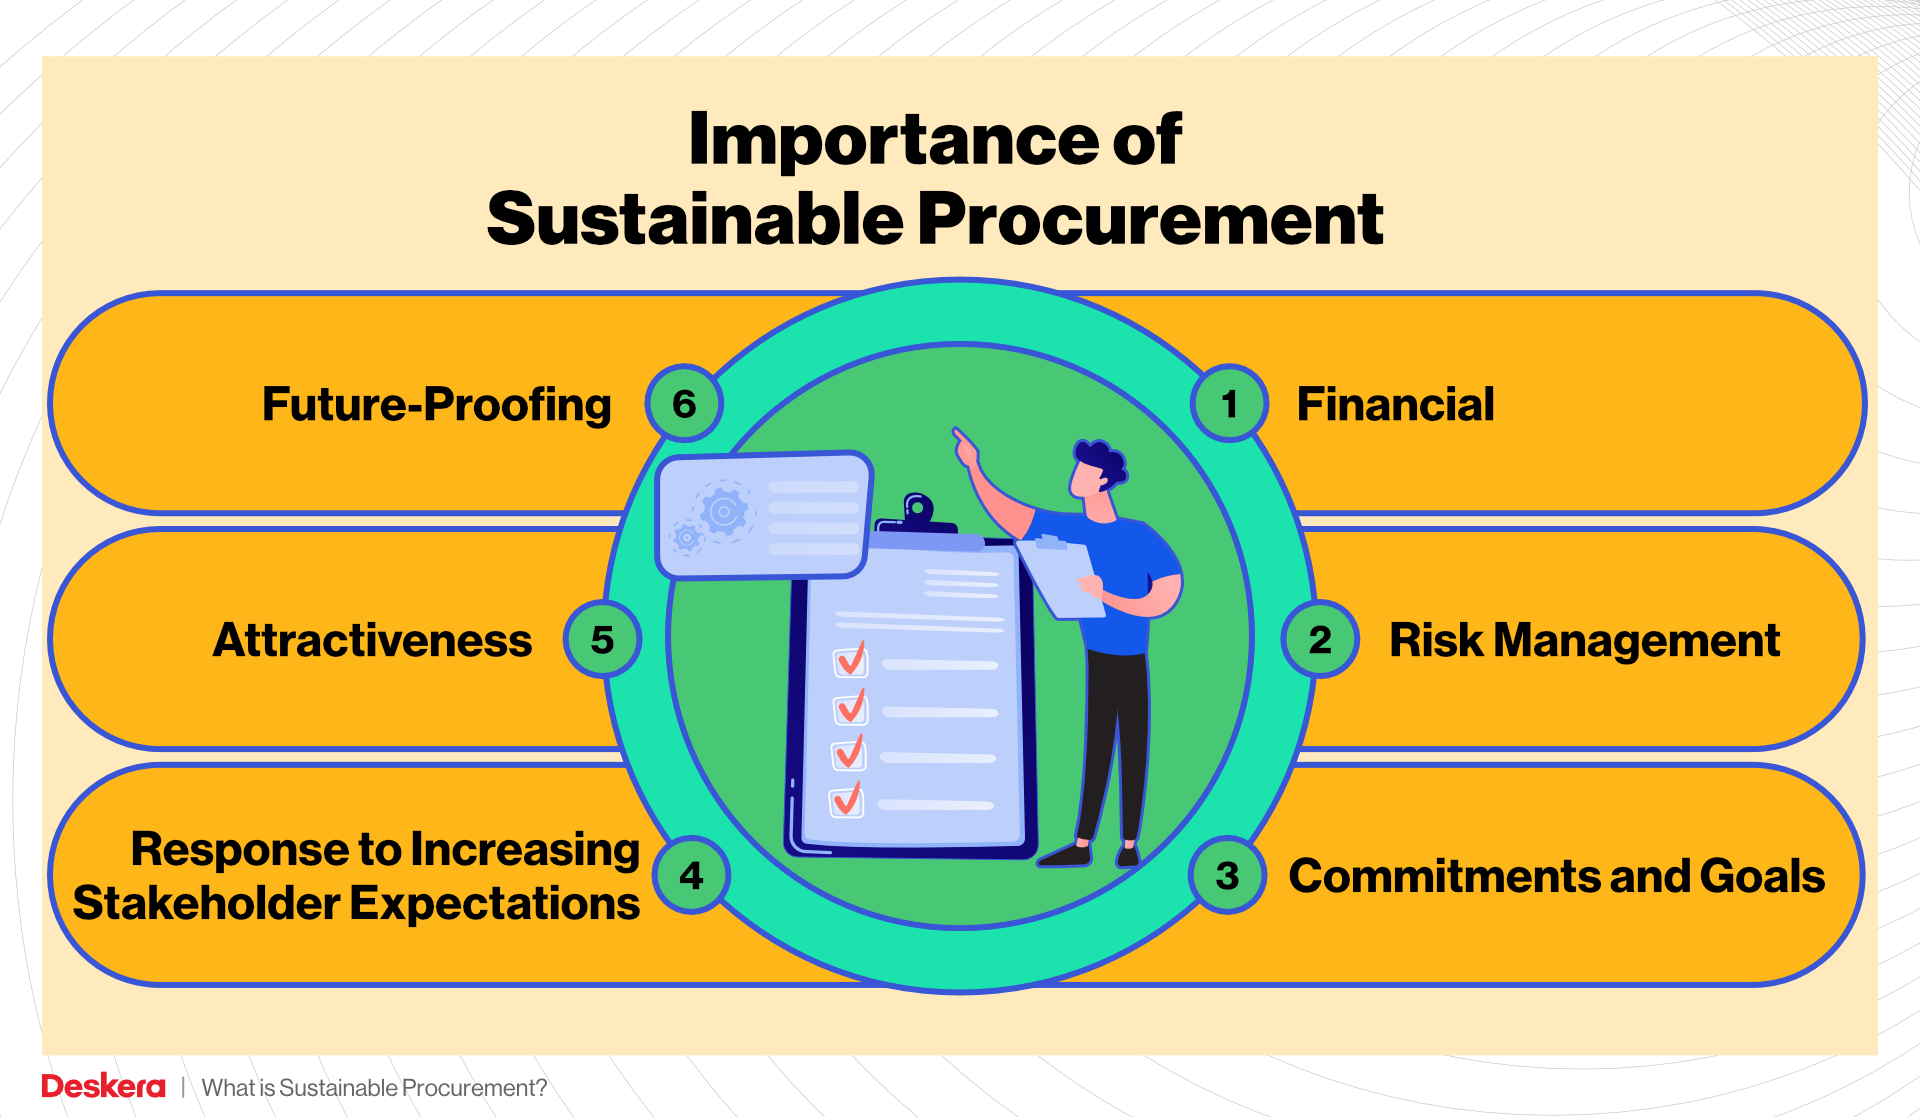 Importance of Sustainable Procurement